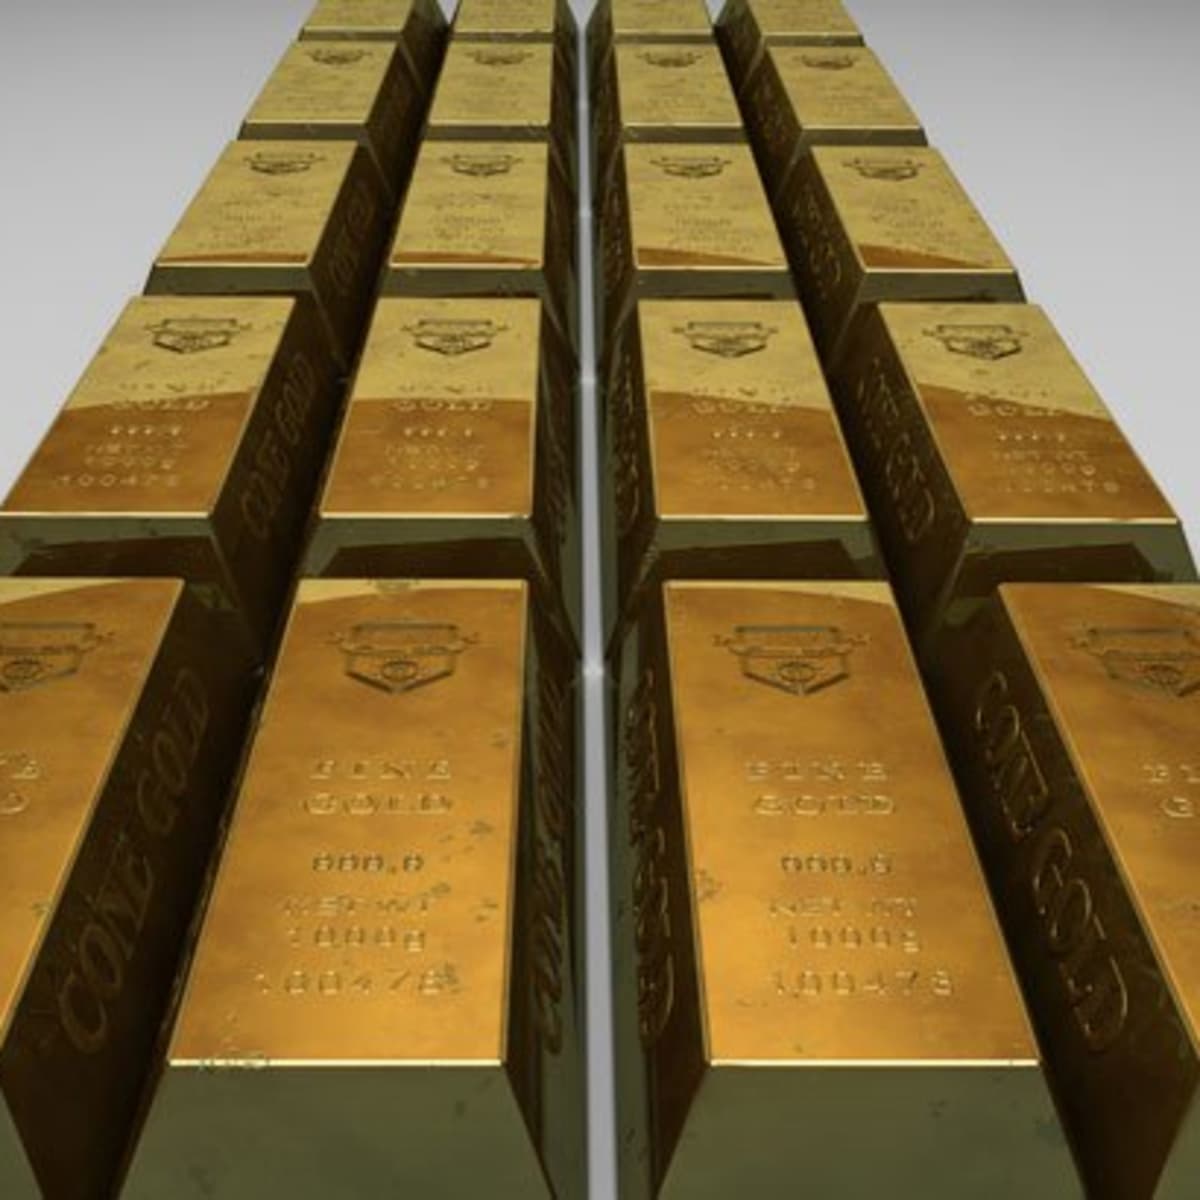 Someone Sold Me Fake Gold? What Can I Do? - Contat NY Gold